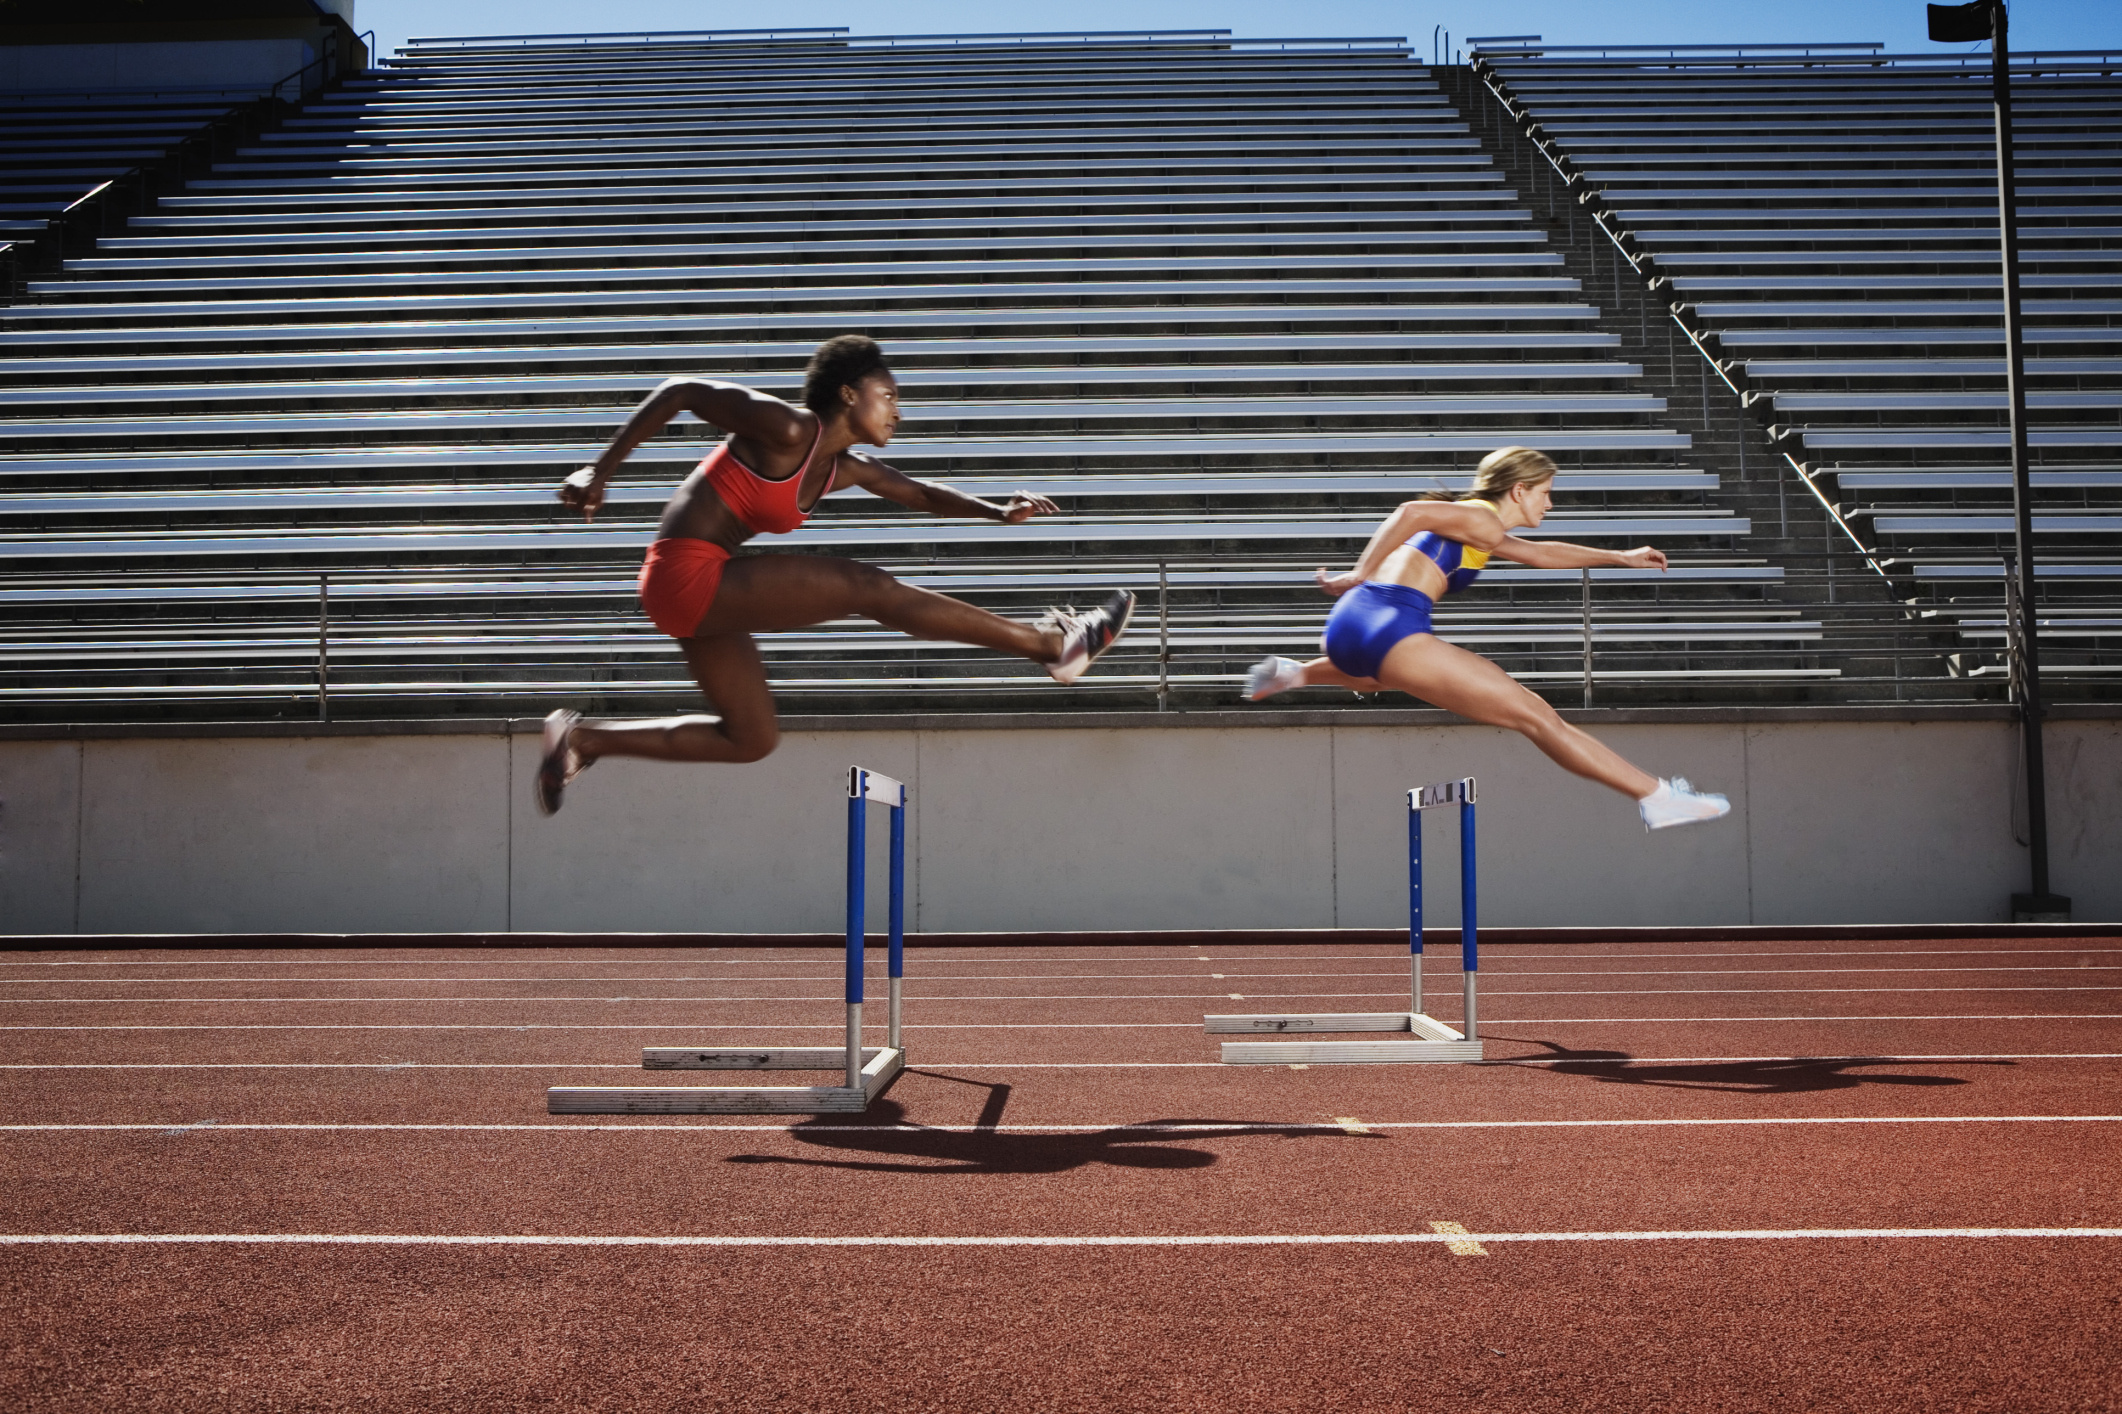 Jumping: Running over the obstacles at a high speed, Hurdling, Track and field athletics, Obstacle race. 2130x1420 HD Wallpaper.